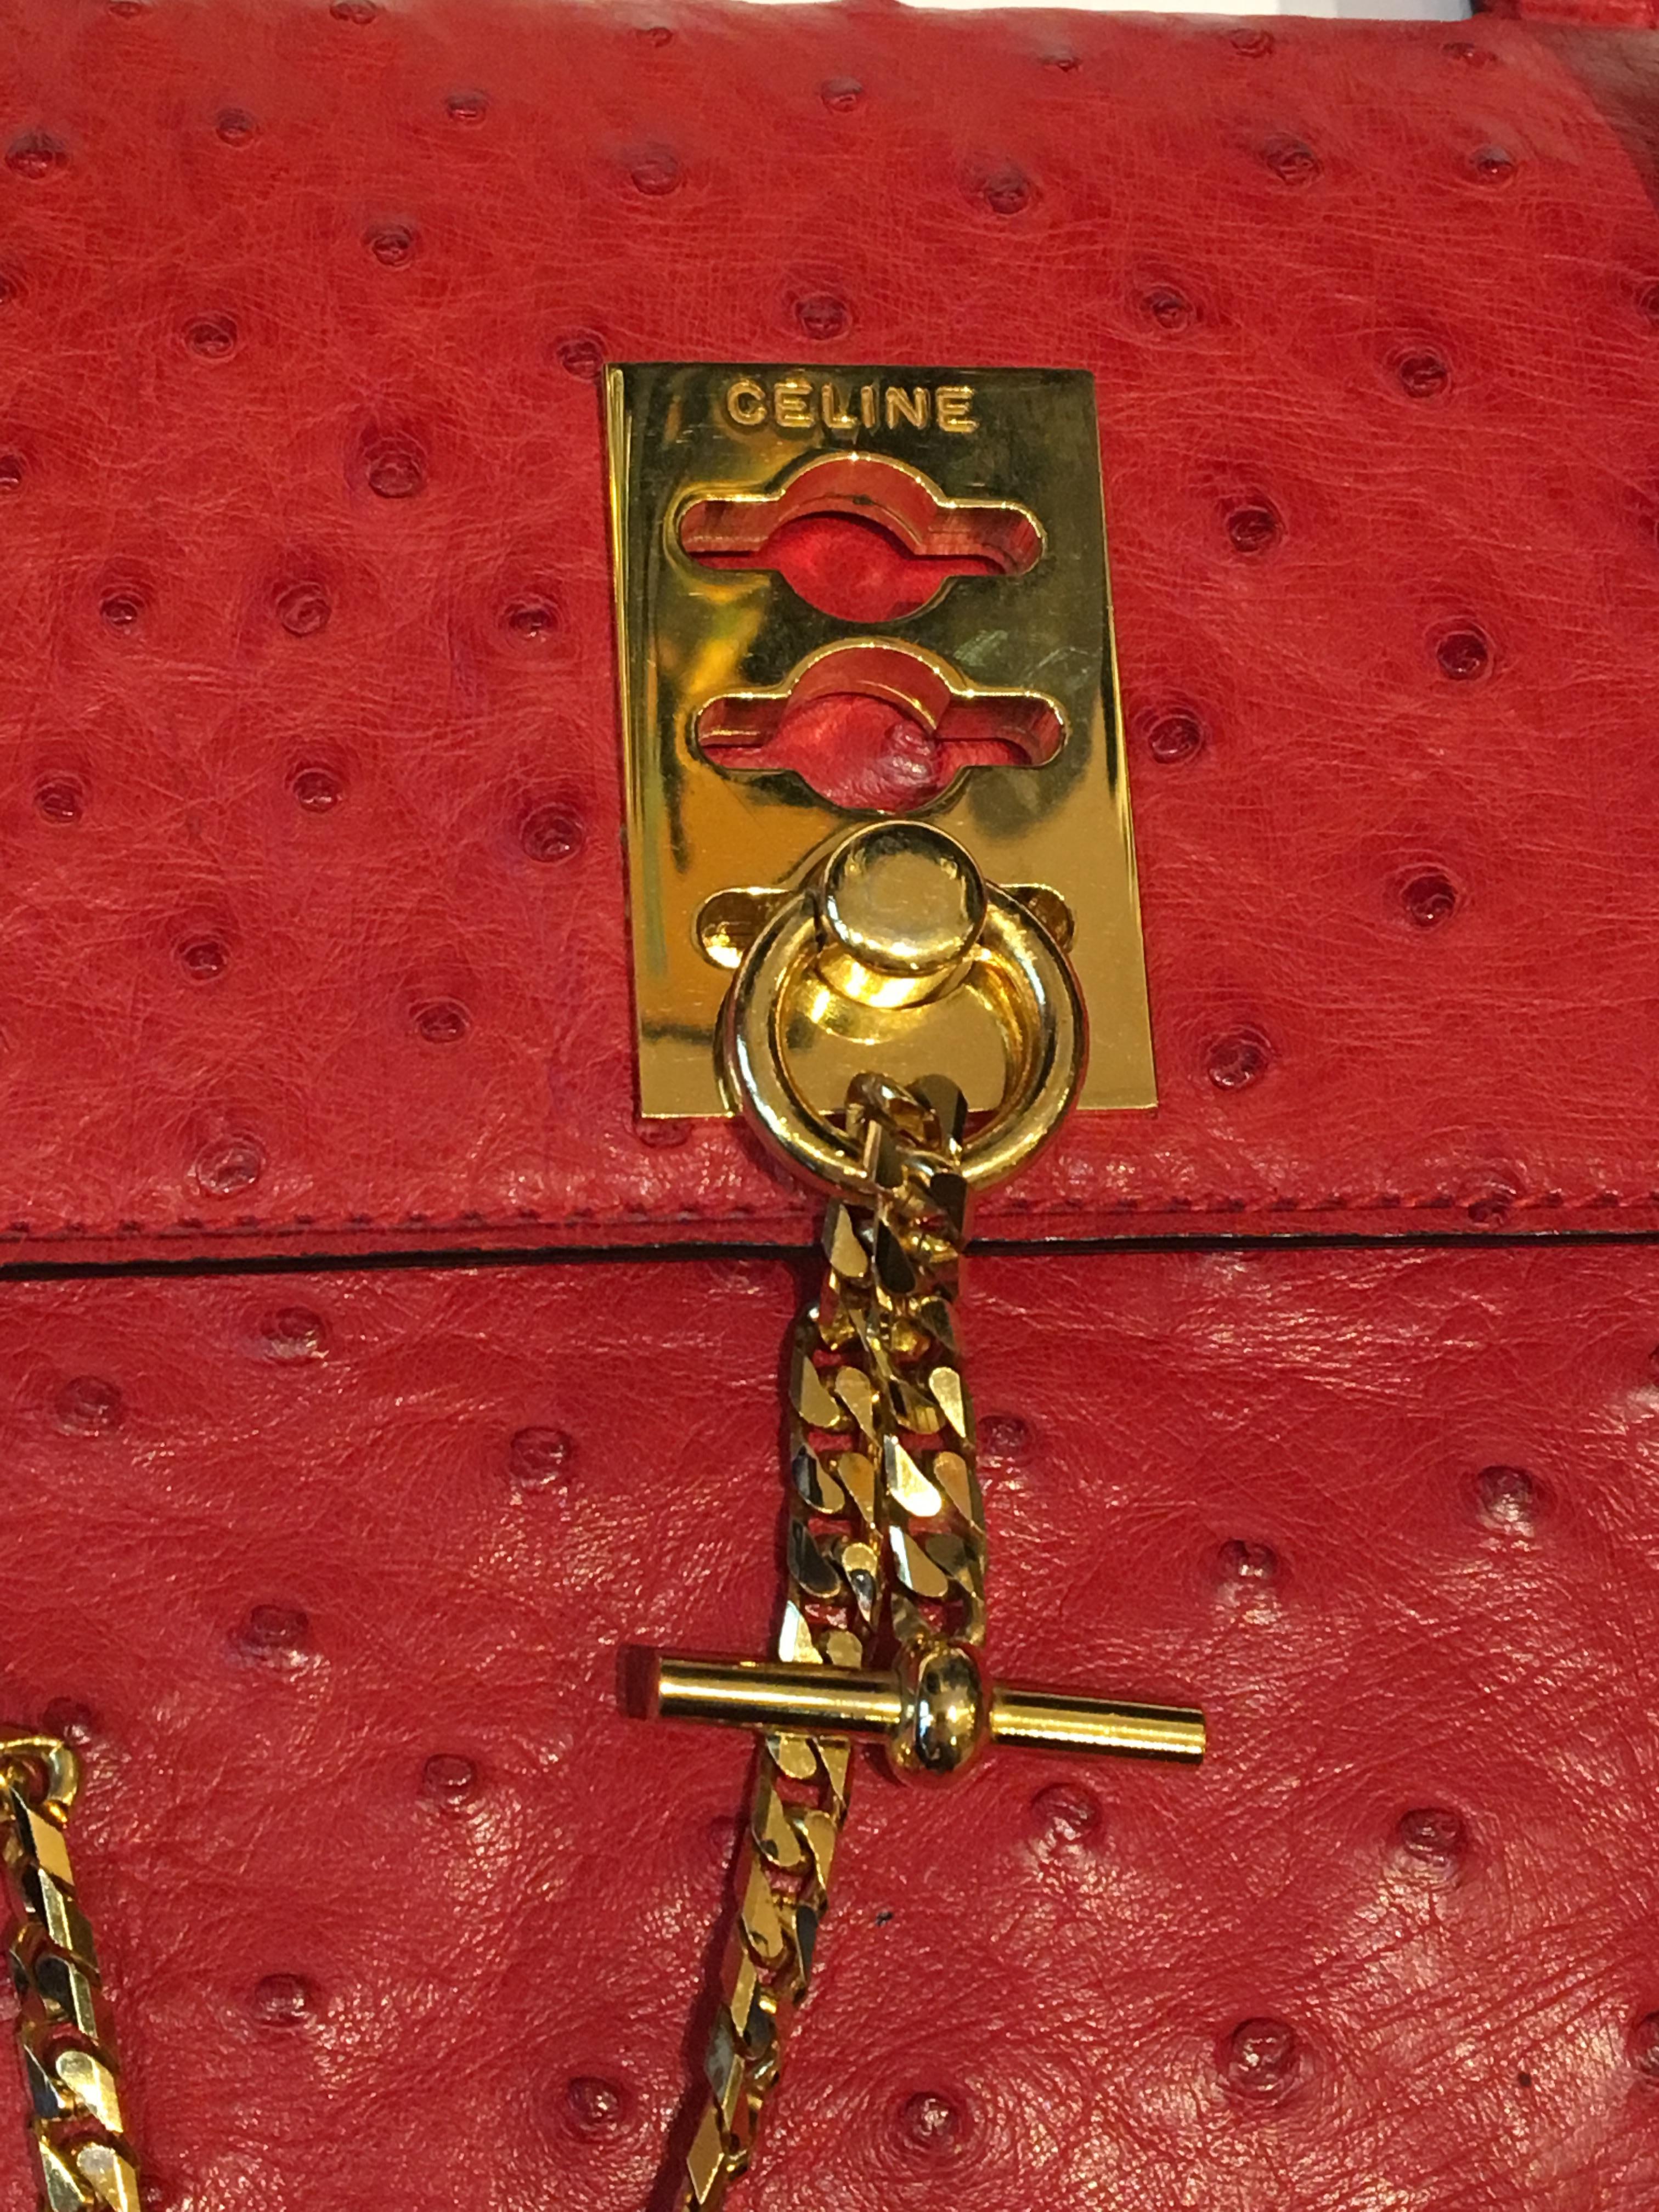 Vintage Celine Red Ostrich bag with golden hardware.
Bag from late 80's early 90's
Really good vintage condition
Size 20x23 cm